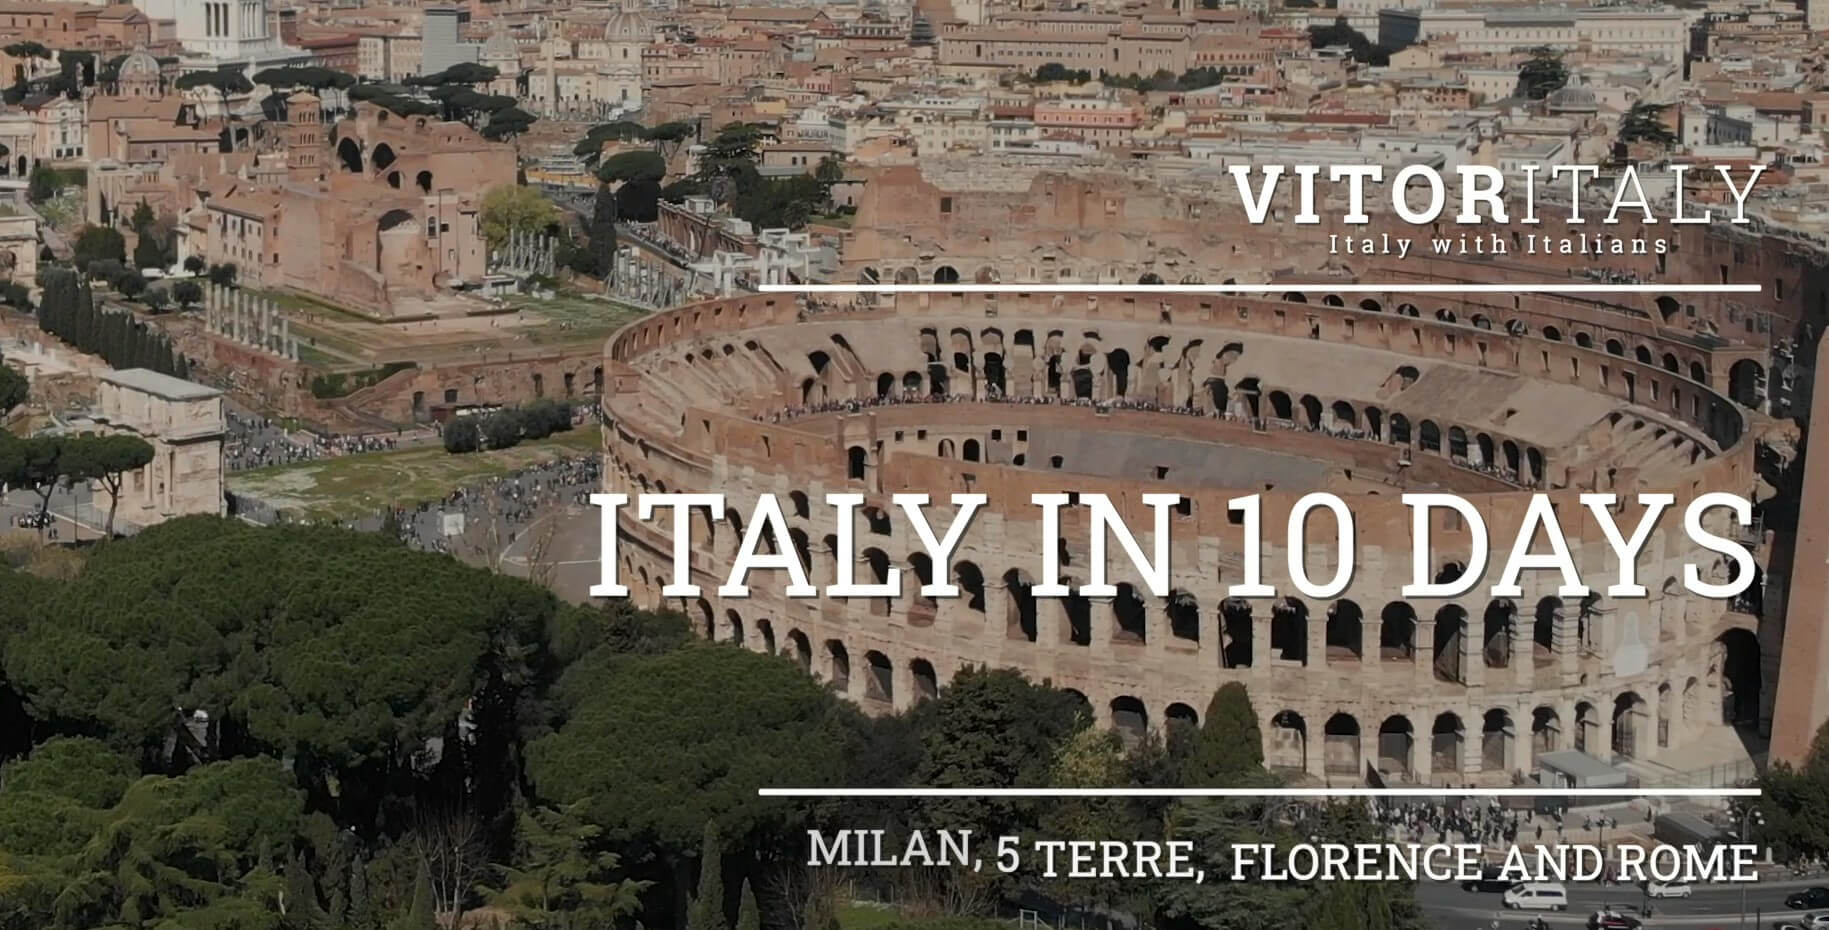 ITALY IN 10 DAYS PRIVATE LUXURY TOUR - Milan, Cinque Terre, Florence and Rome 